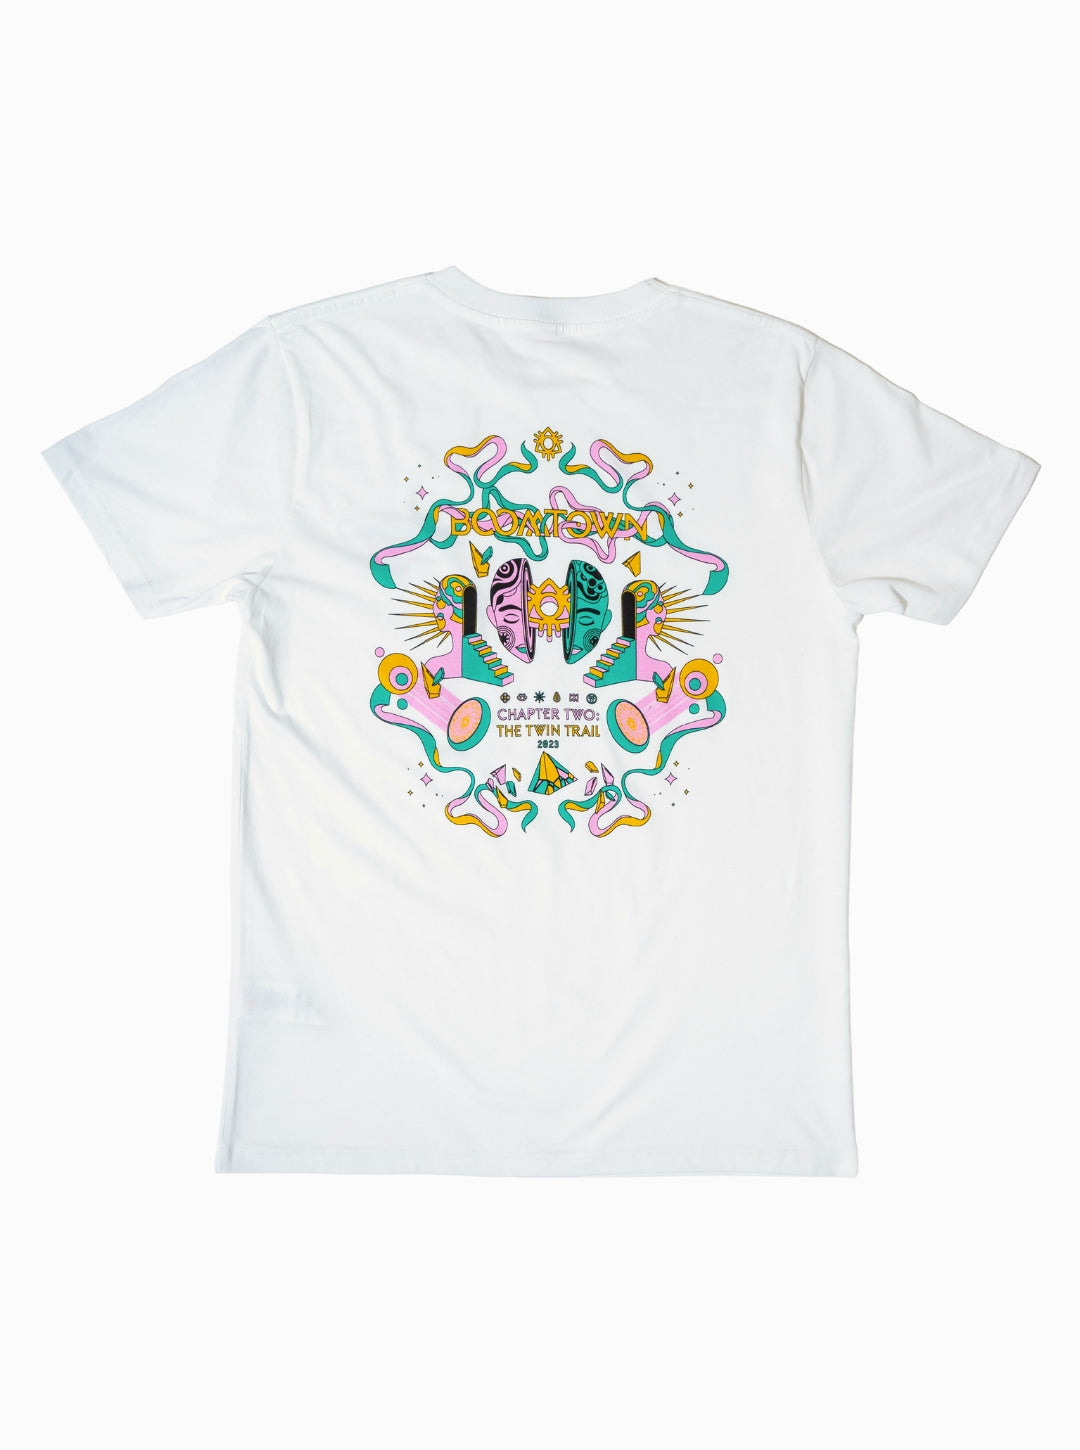 The Twin Trail Turquoise, Pink & Yellow T-Shirt